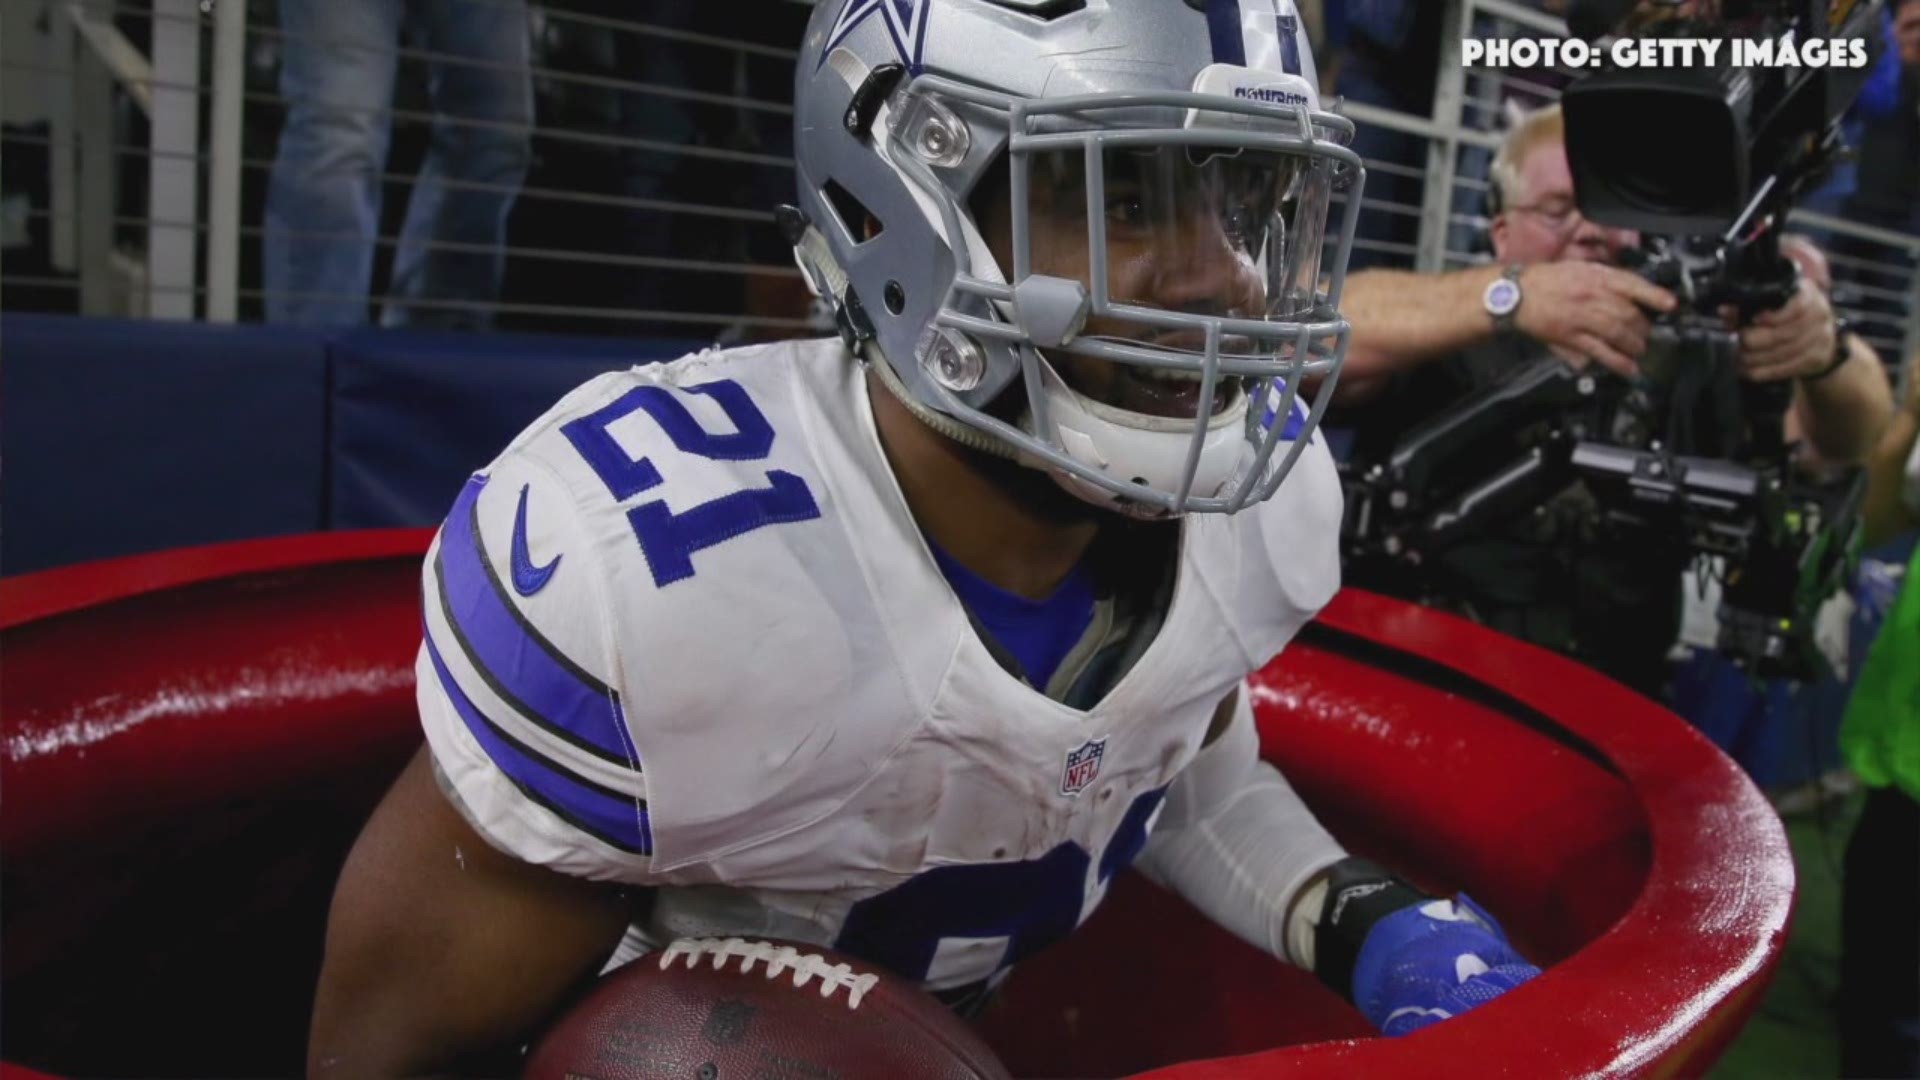 Ezekiel Elliott's touchdown celebration took the internet by storm Sunday night, and caused a spike in donations to a good cause. WFAA